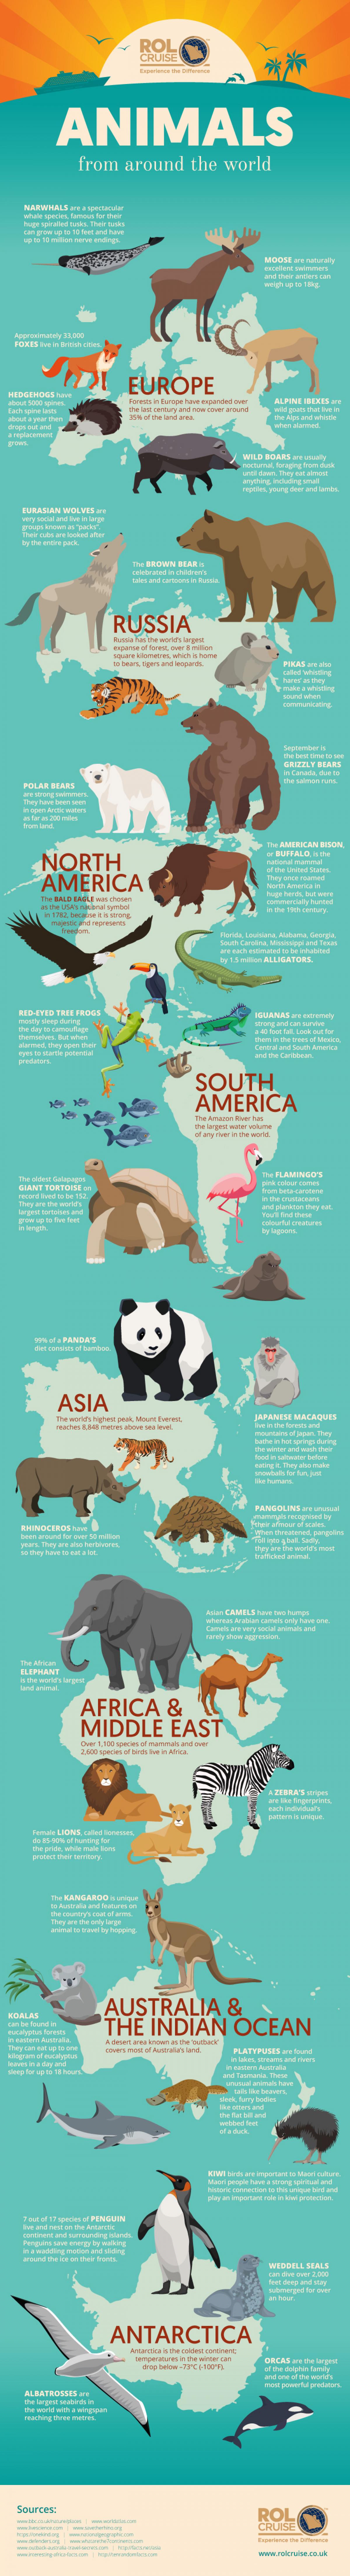 Animals From Around the World by ROL Cruise